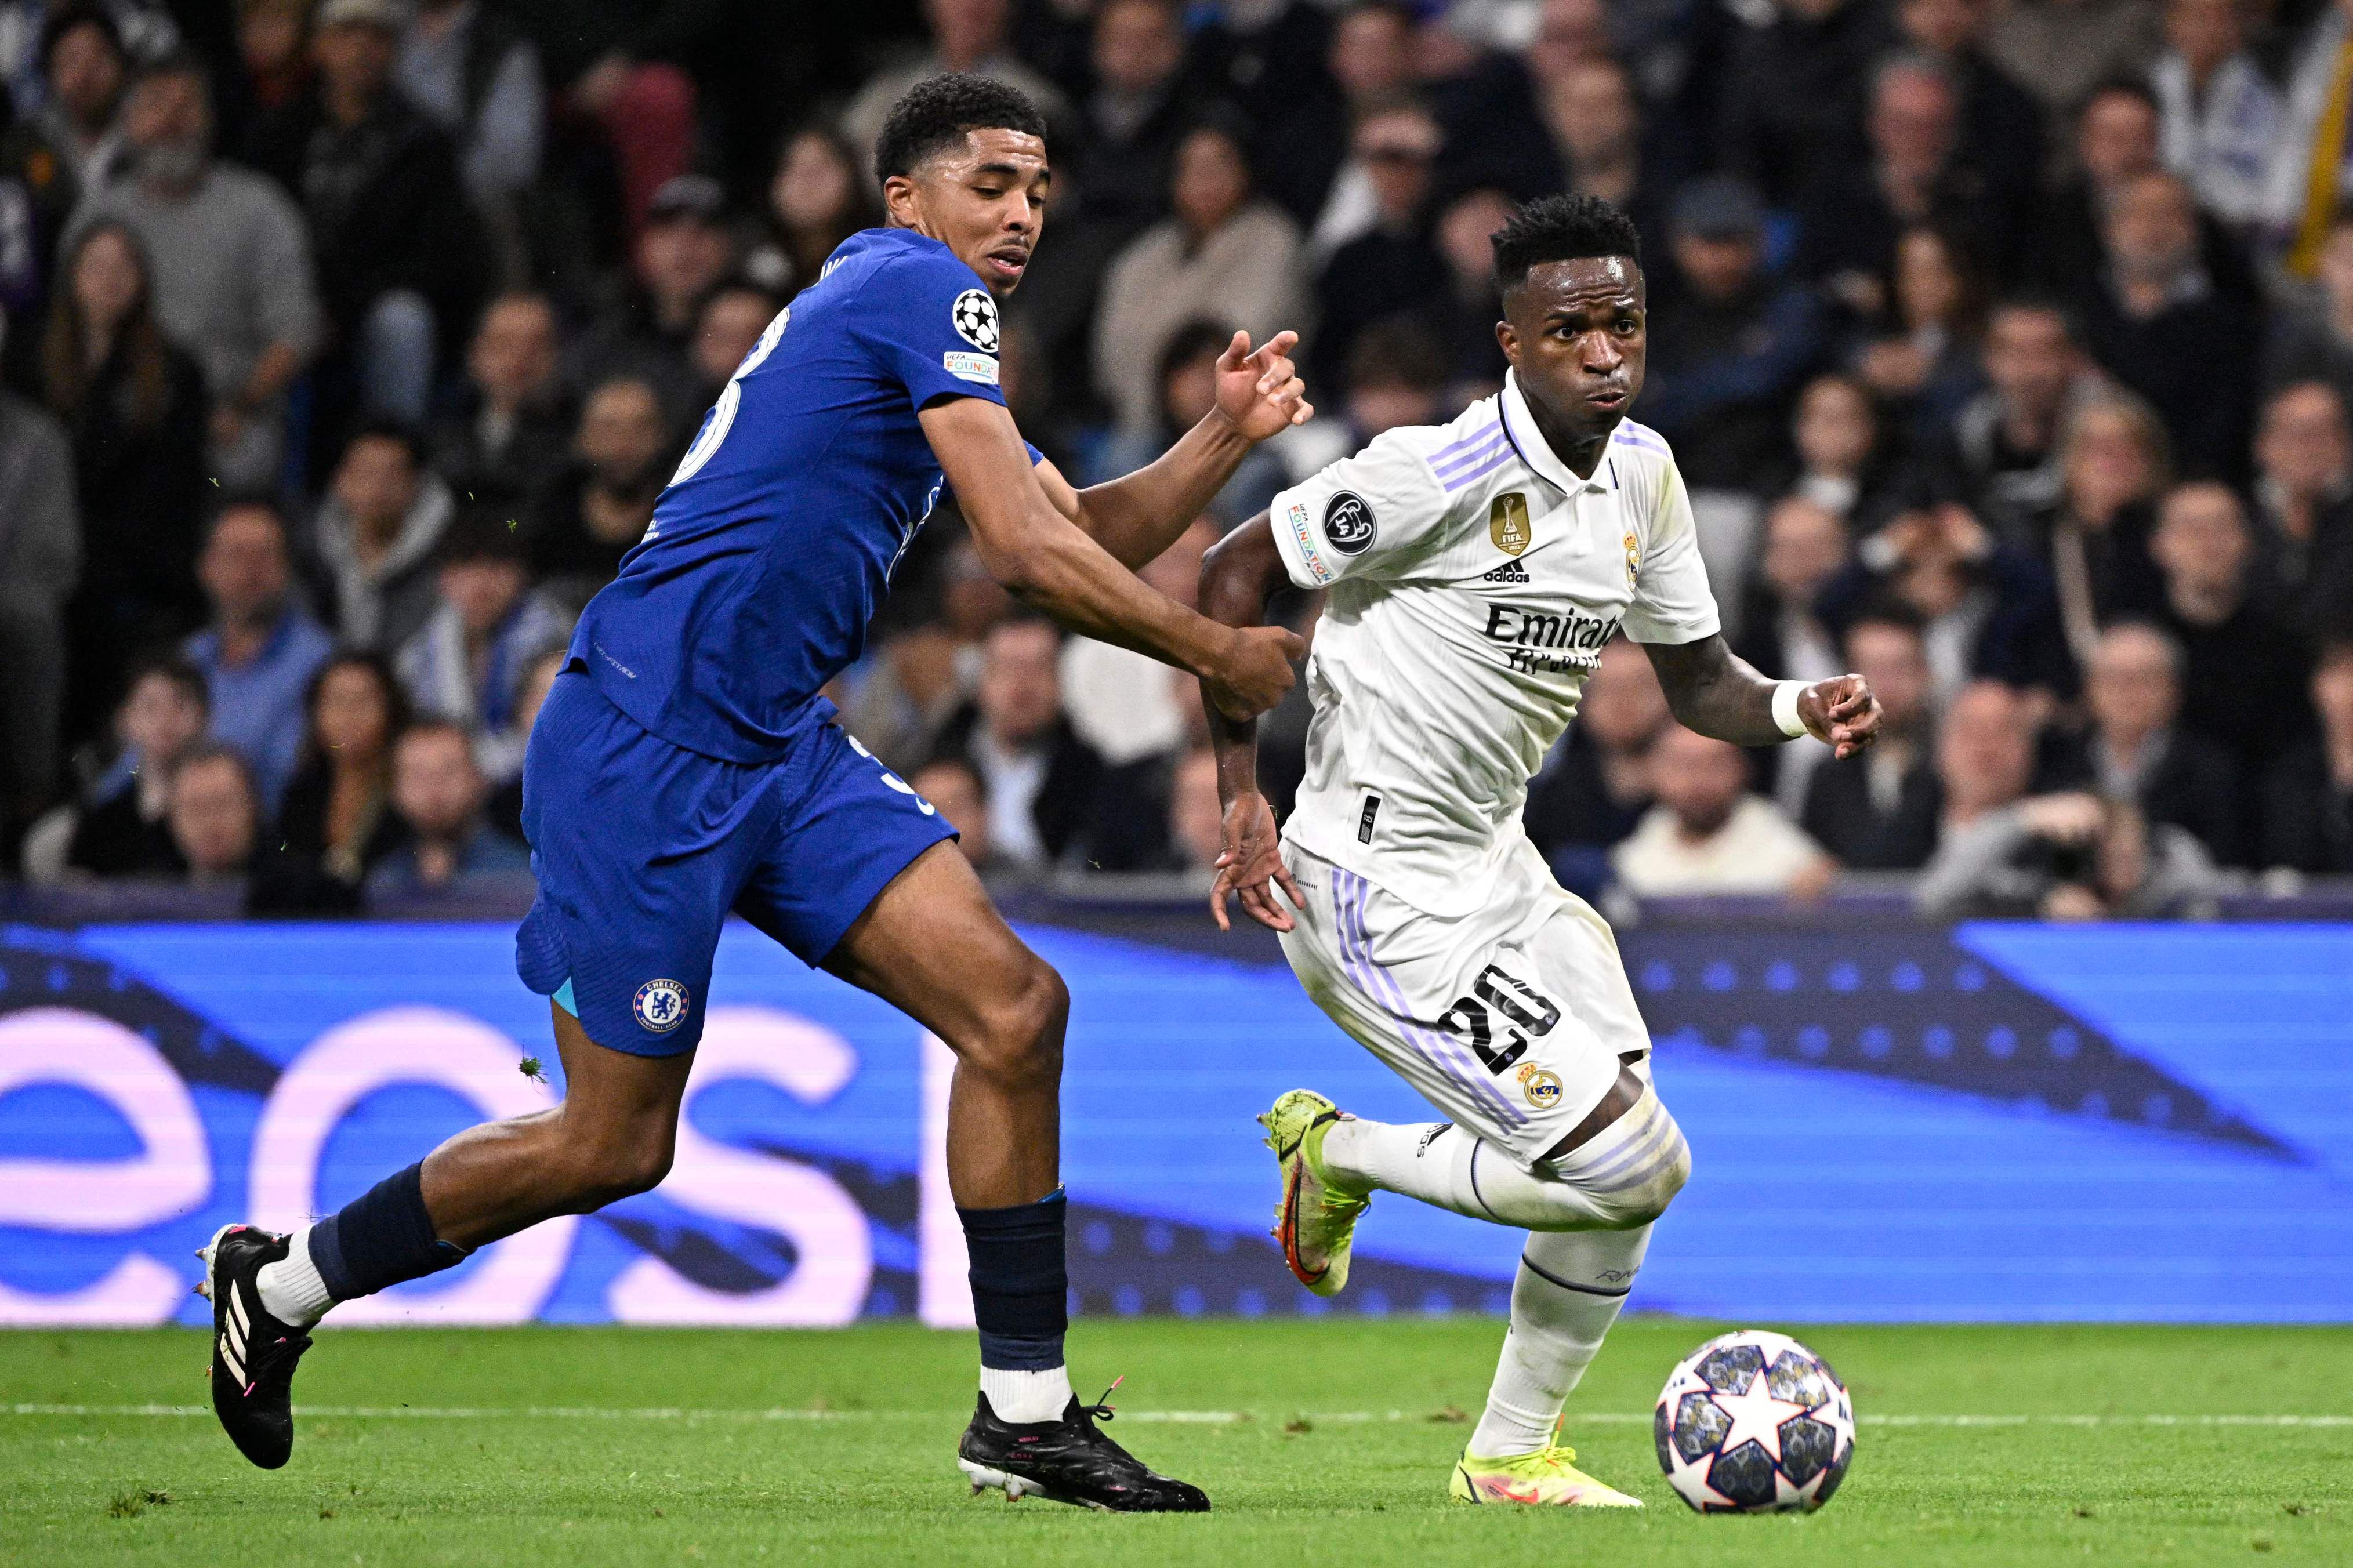 Real Madrid's Brazilian forward Vinicius Junior (R) vies with Chelsea's French defender Wesley Fofana during the UEFA Champions League quarter final first leg football match between Real Madrid CF and Chelsea FC at the Santiago Bernabeu stadium in Madrid on April 12, 2023. (Photo by JAVIER SORIANO / AFP)